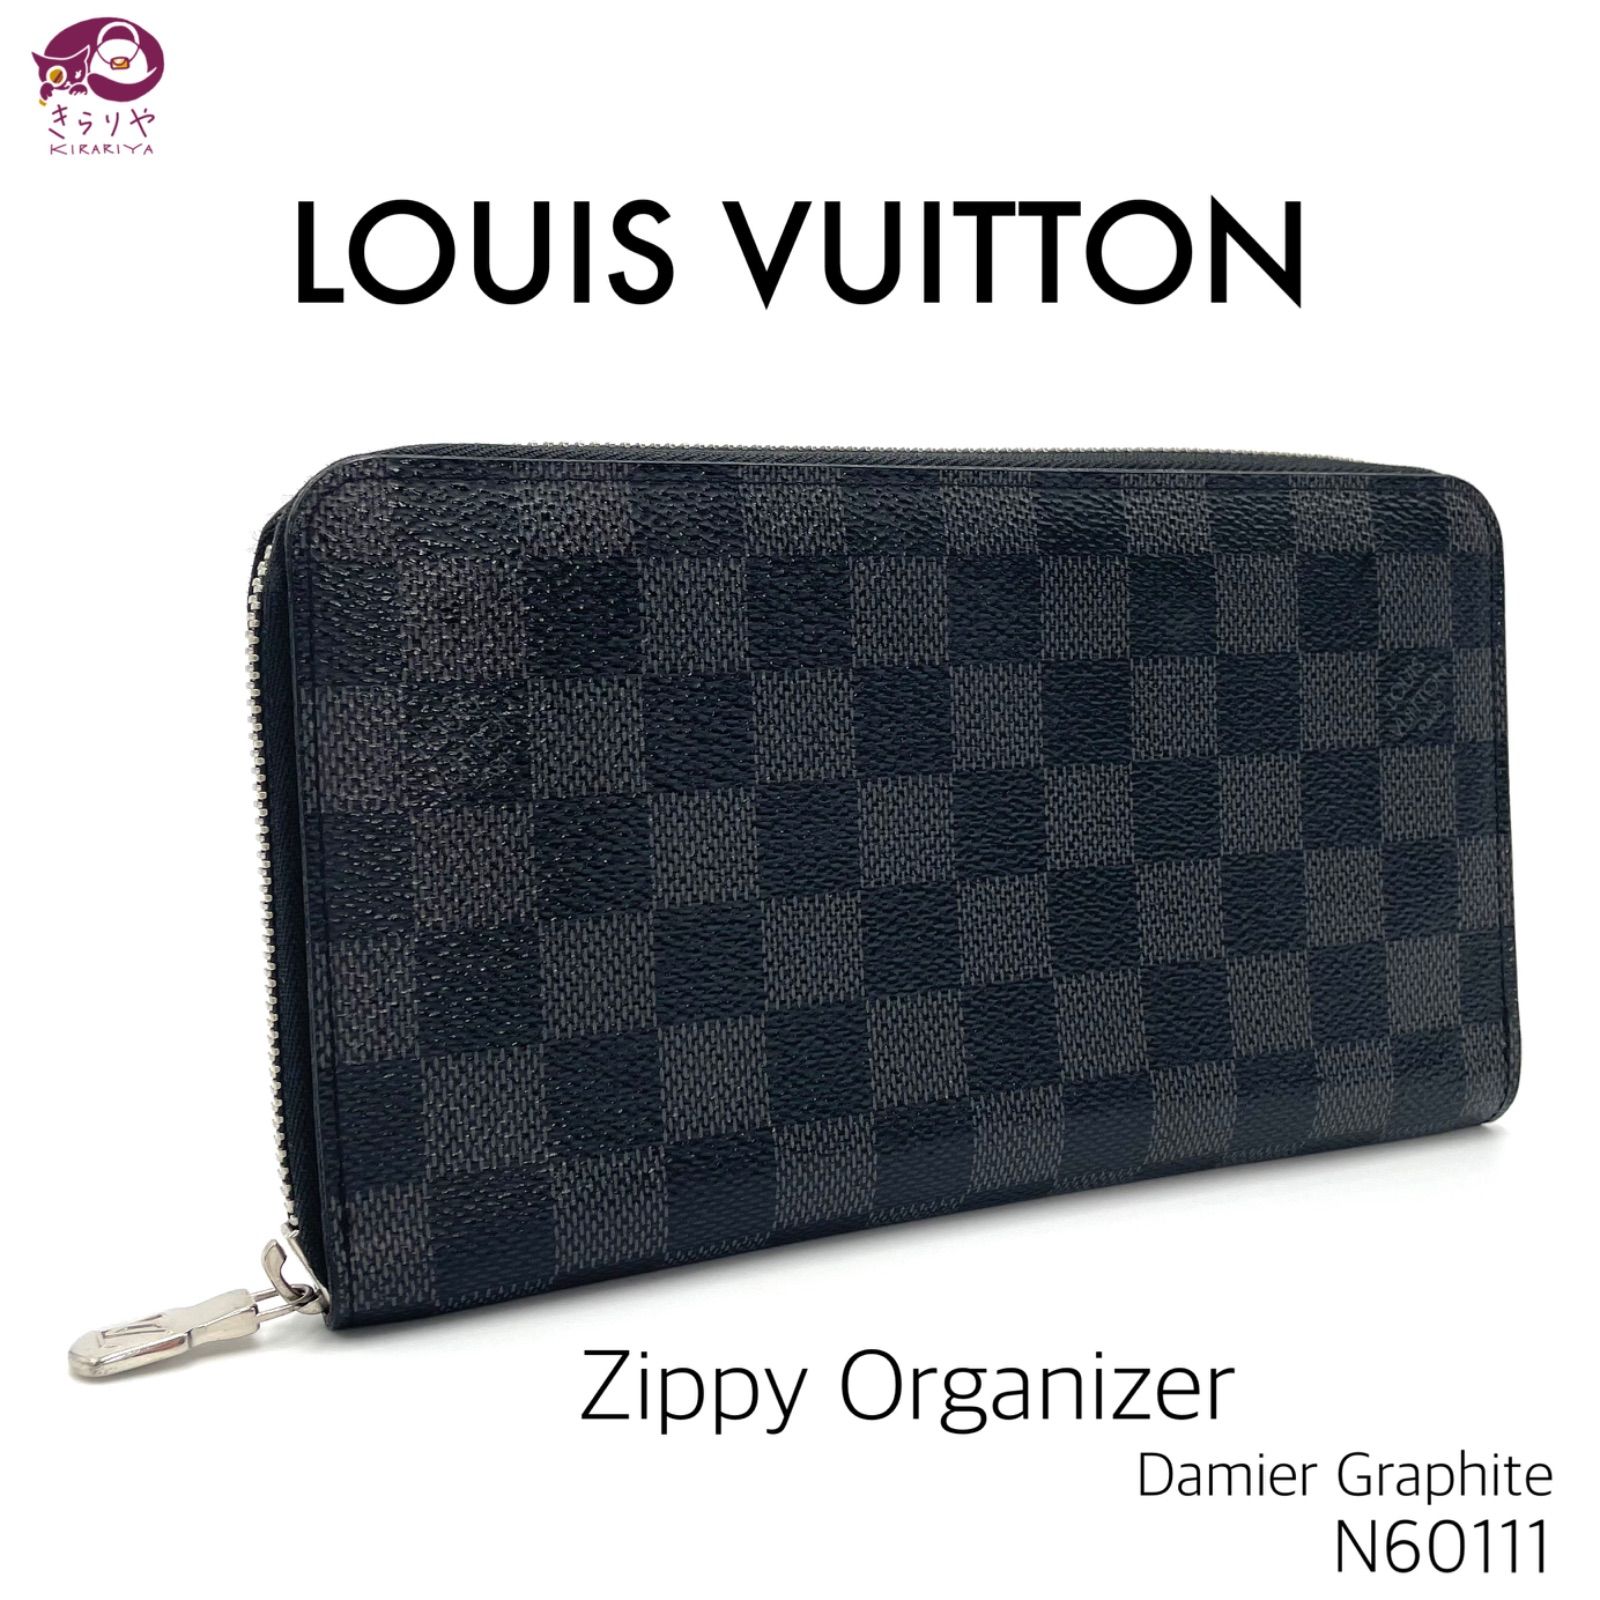 ☆LOUIS VUITTON ルイヴィトン N60111 ダミエ グラフィット ジッピー